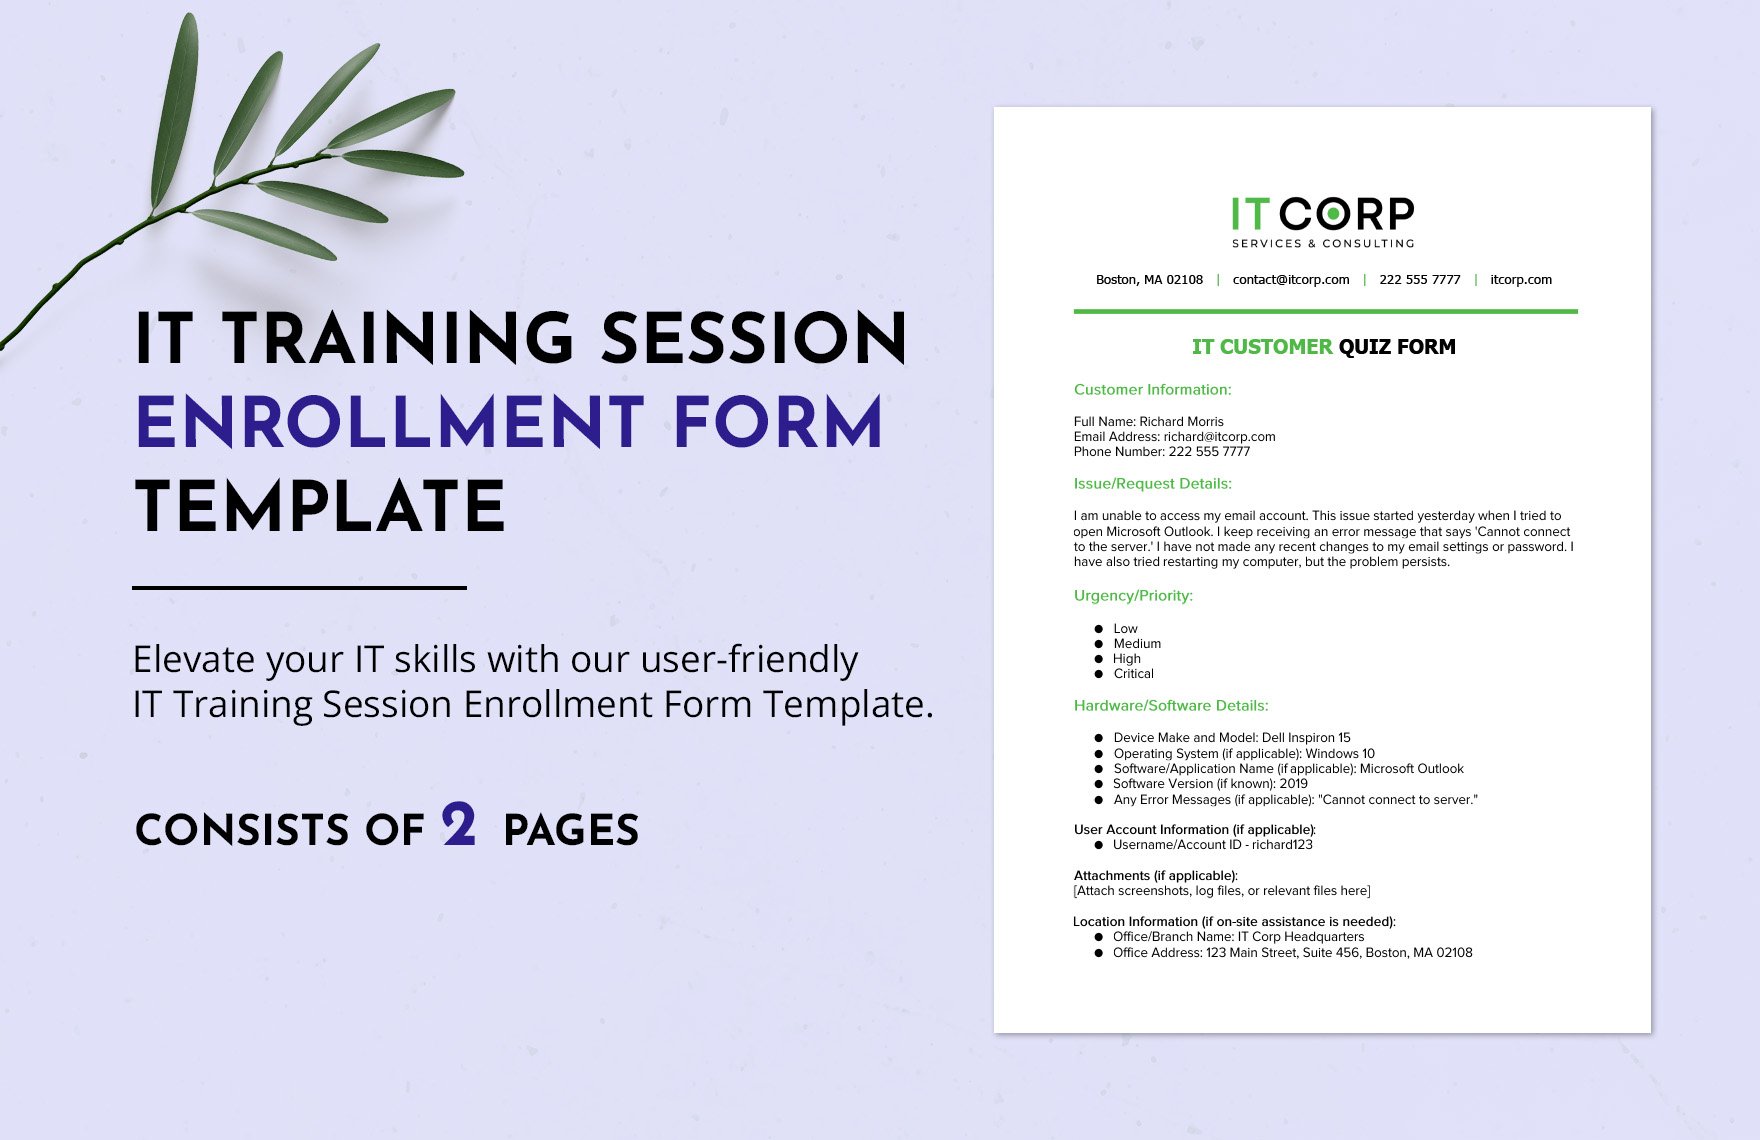 IT Training Session Enrollment Form Template